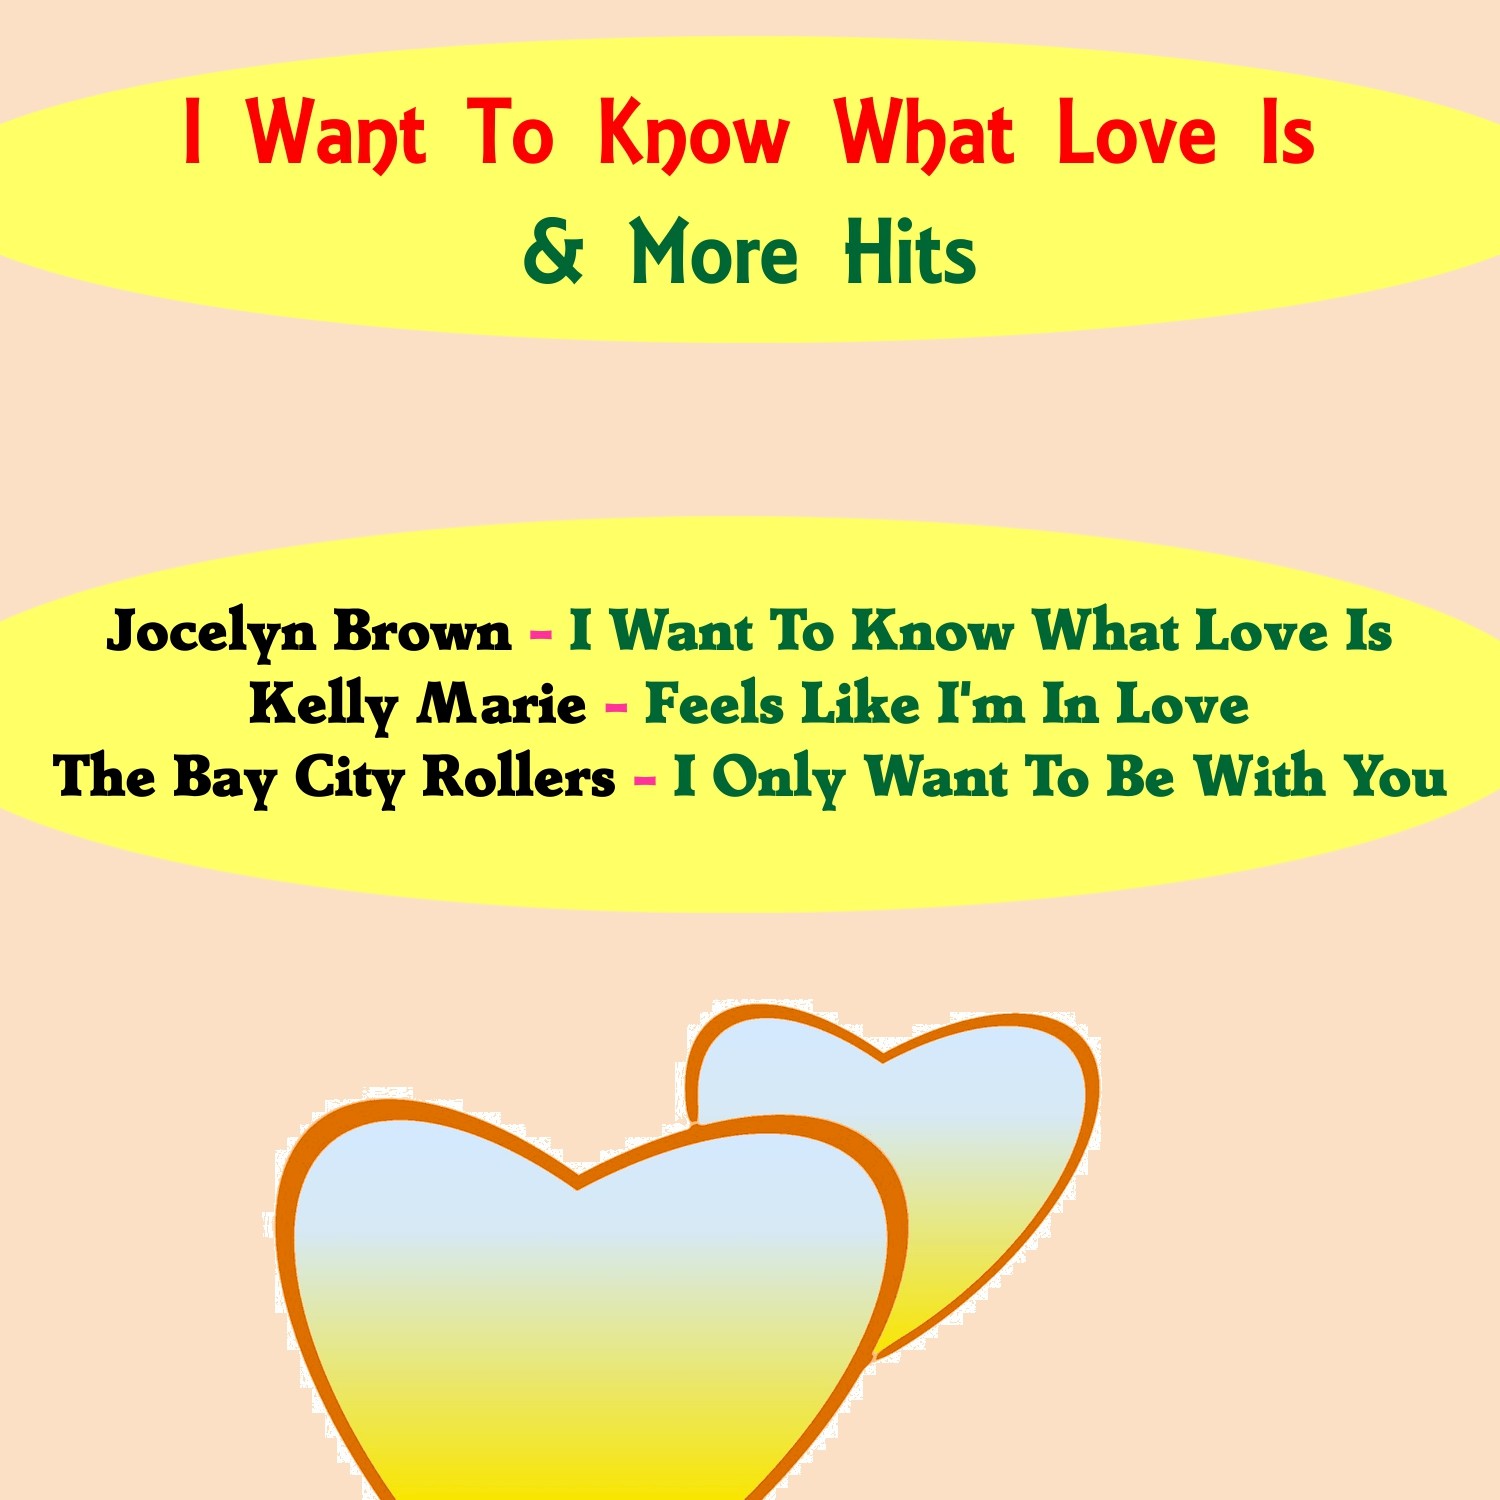 I Want to Know What Love Is & More Hits